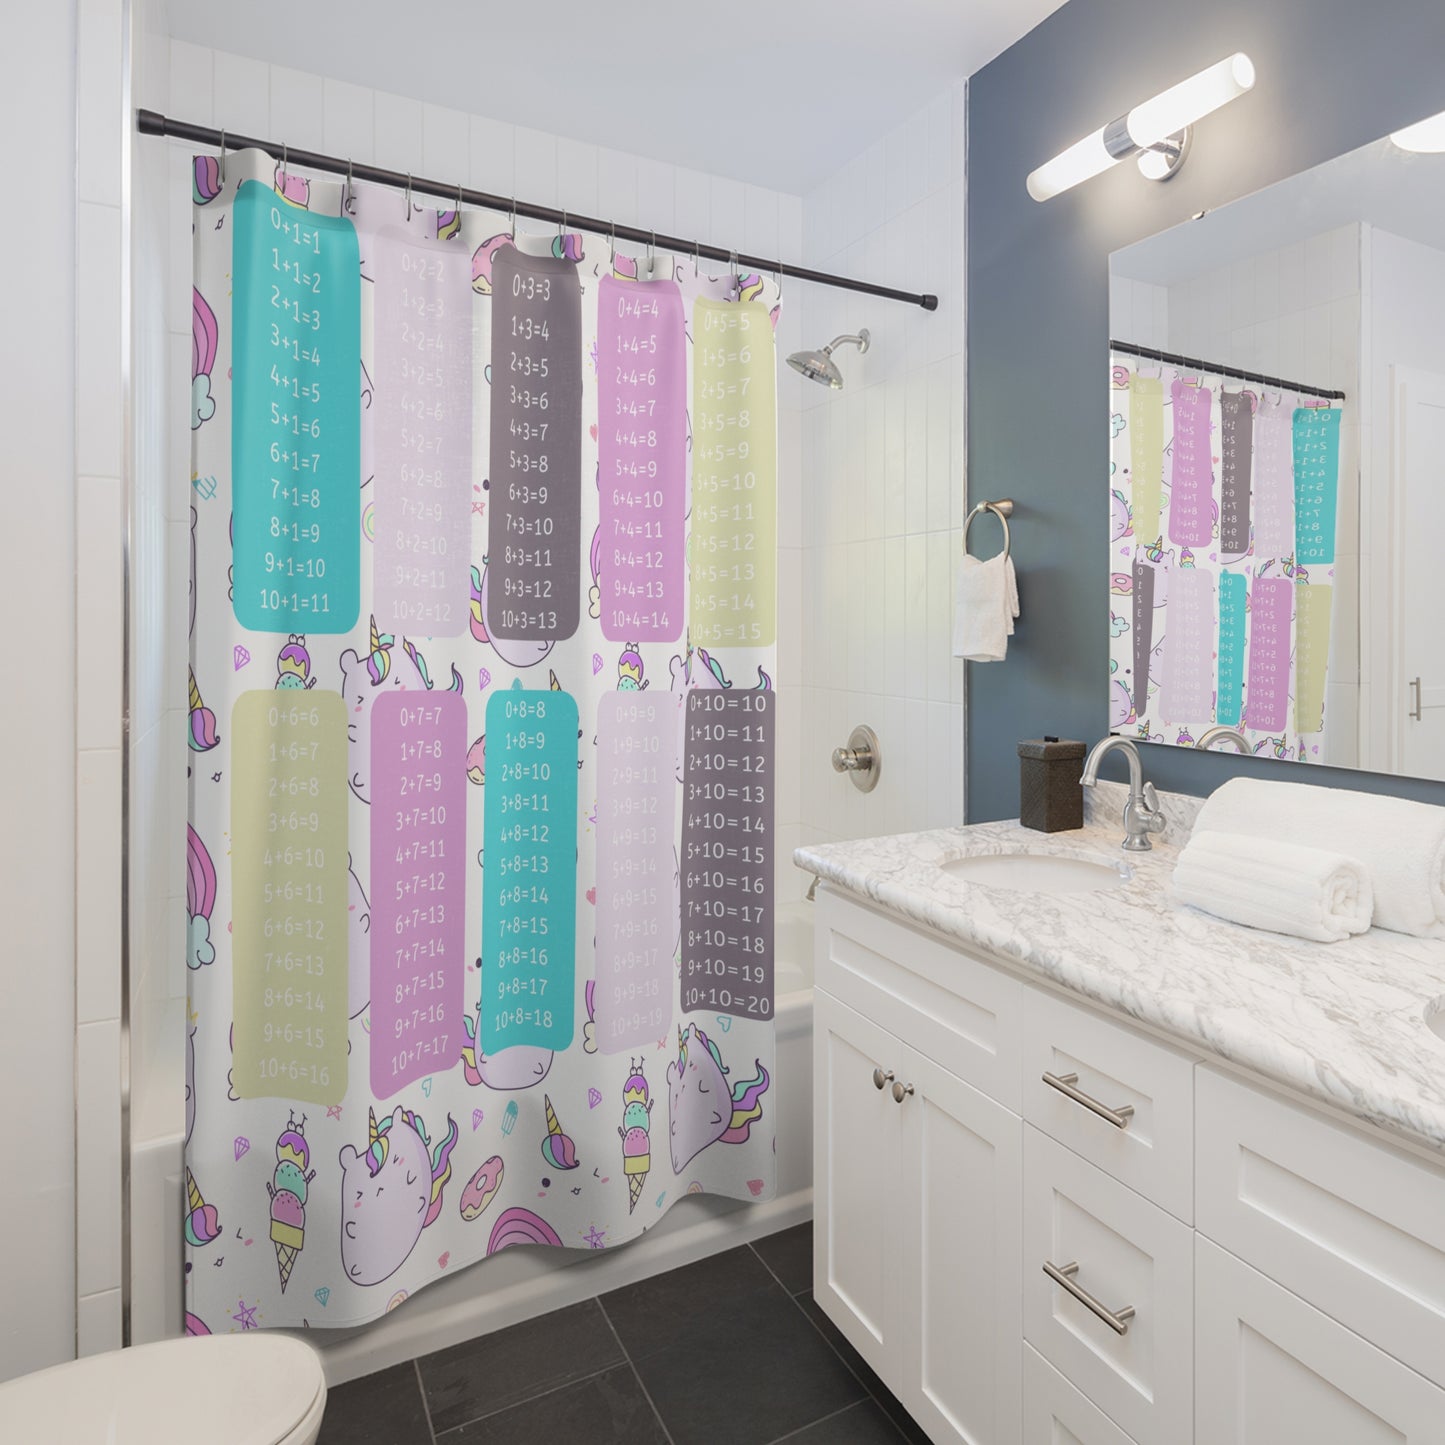 Unicorn and Addition Shower Curtain